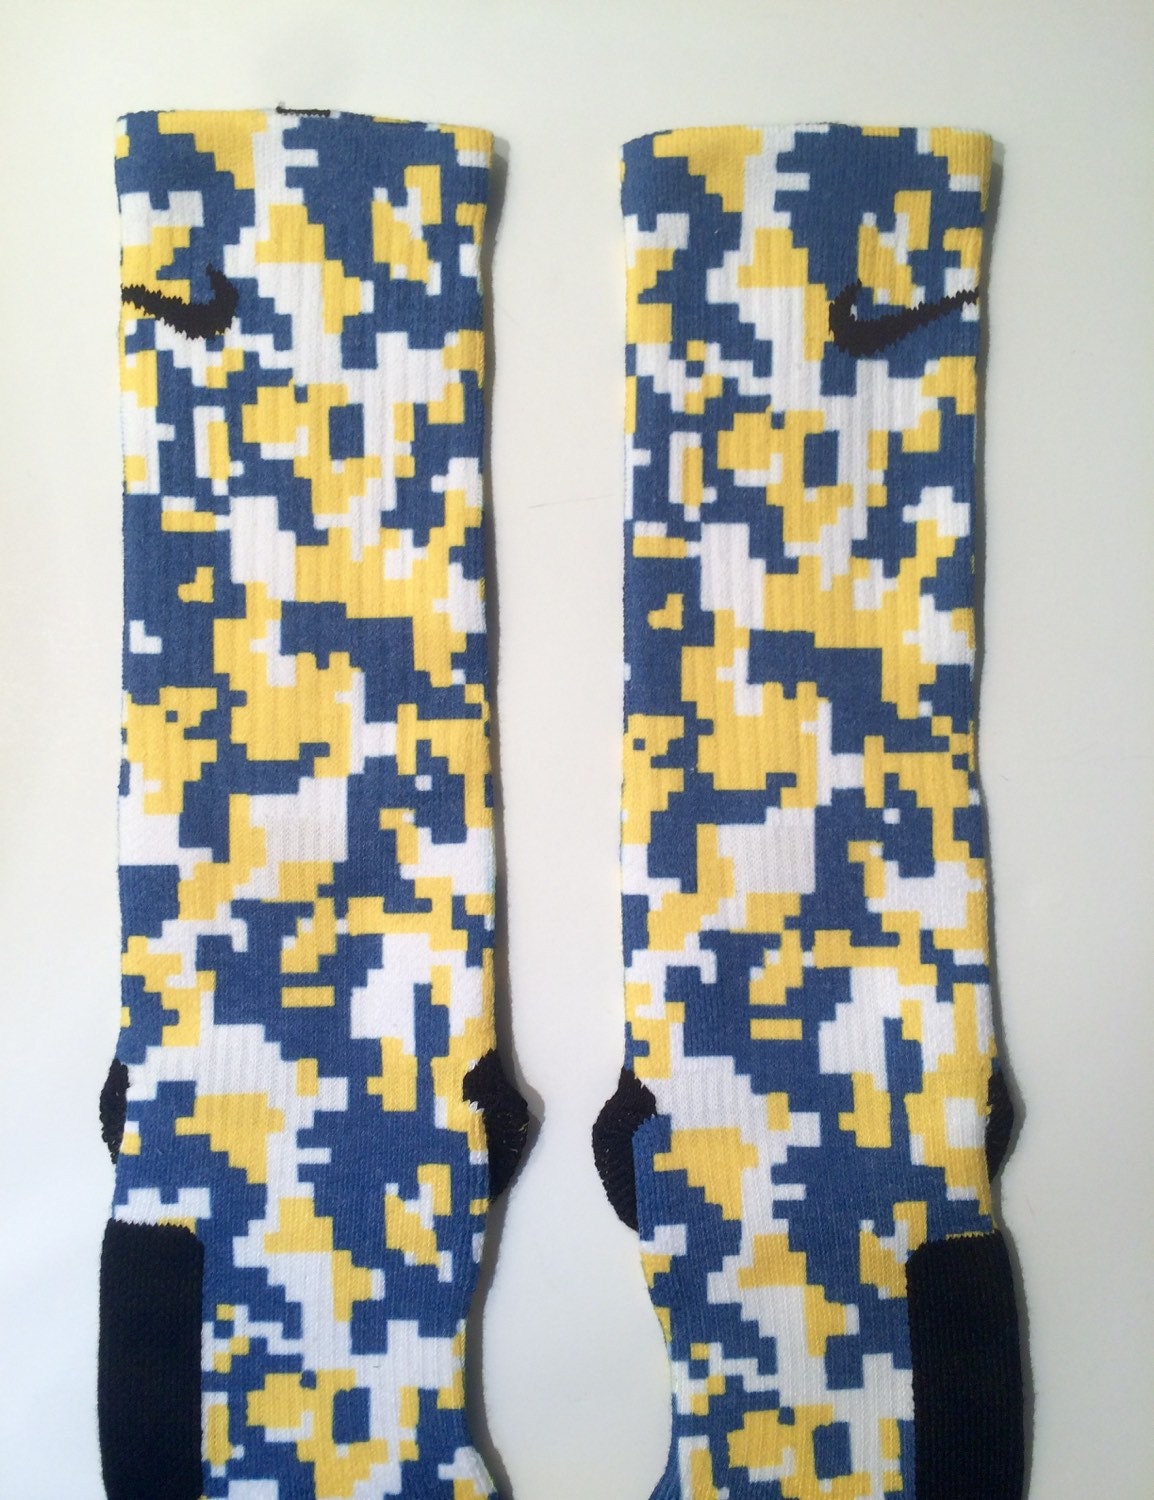 Blue and Gold Digital Camo Nike Elites by LeagueReady on Etsy